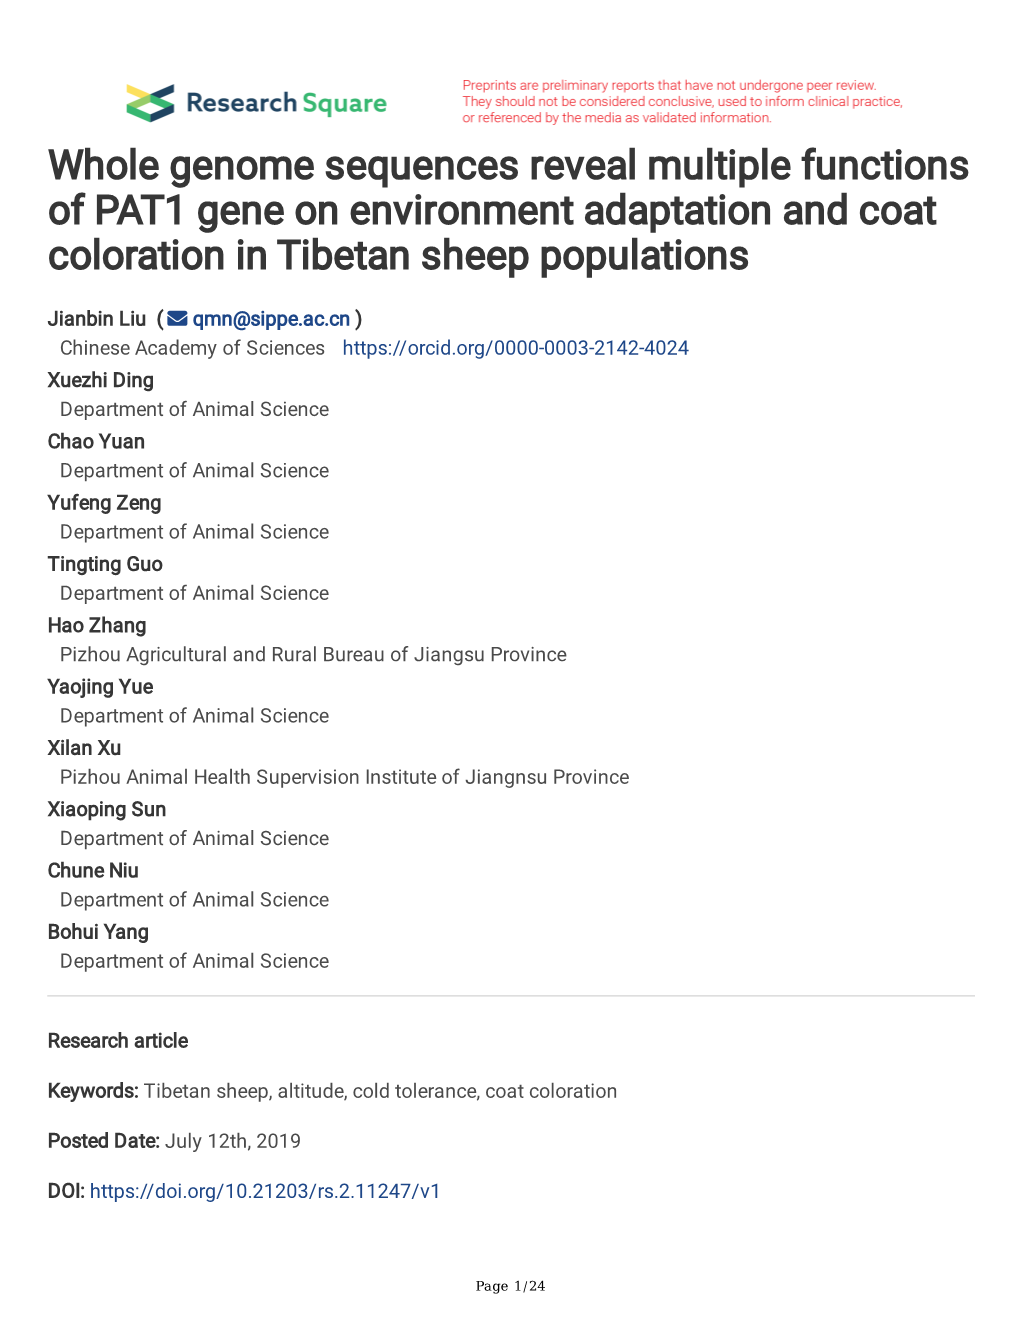 Whole Genome Sequences Reveal Multiple Functions of PAT1 Gene on Environment Adaptation and Coat Coloration in Tibetan Sheep Populations